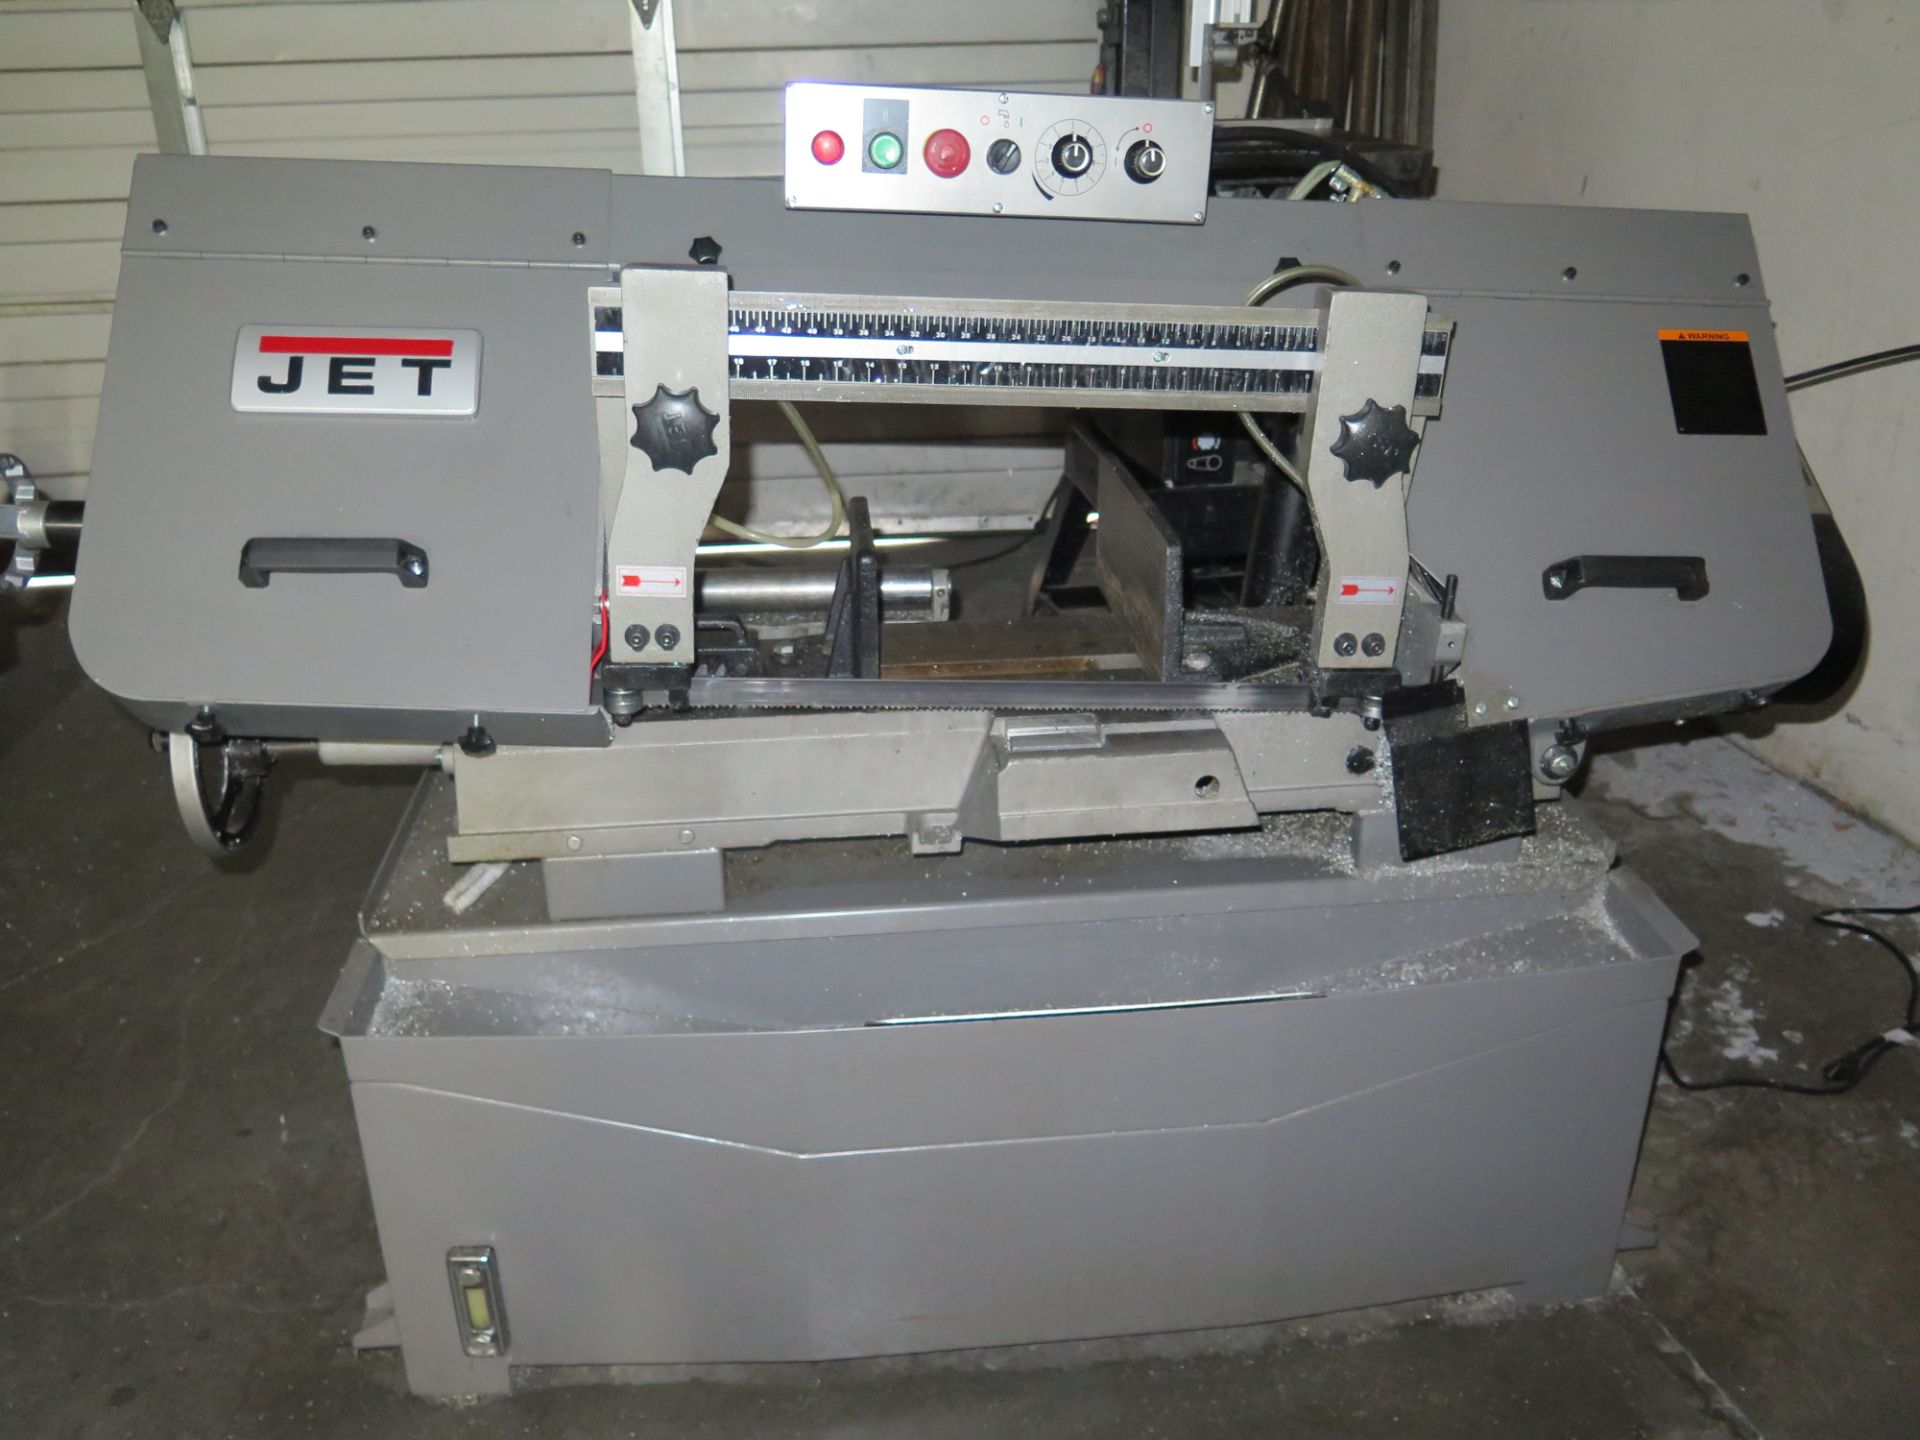 Jet HBS-1018 10” Horizontal Band Saw s/n 22072603764 w/ Manual Clamping, Coolant (SOLD AS-IS - NO